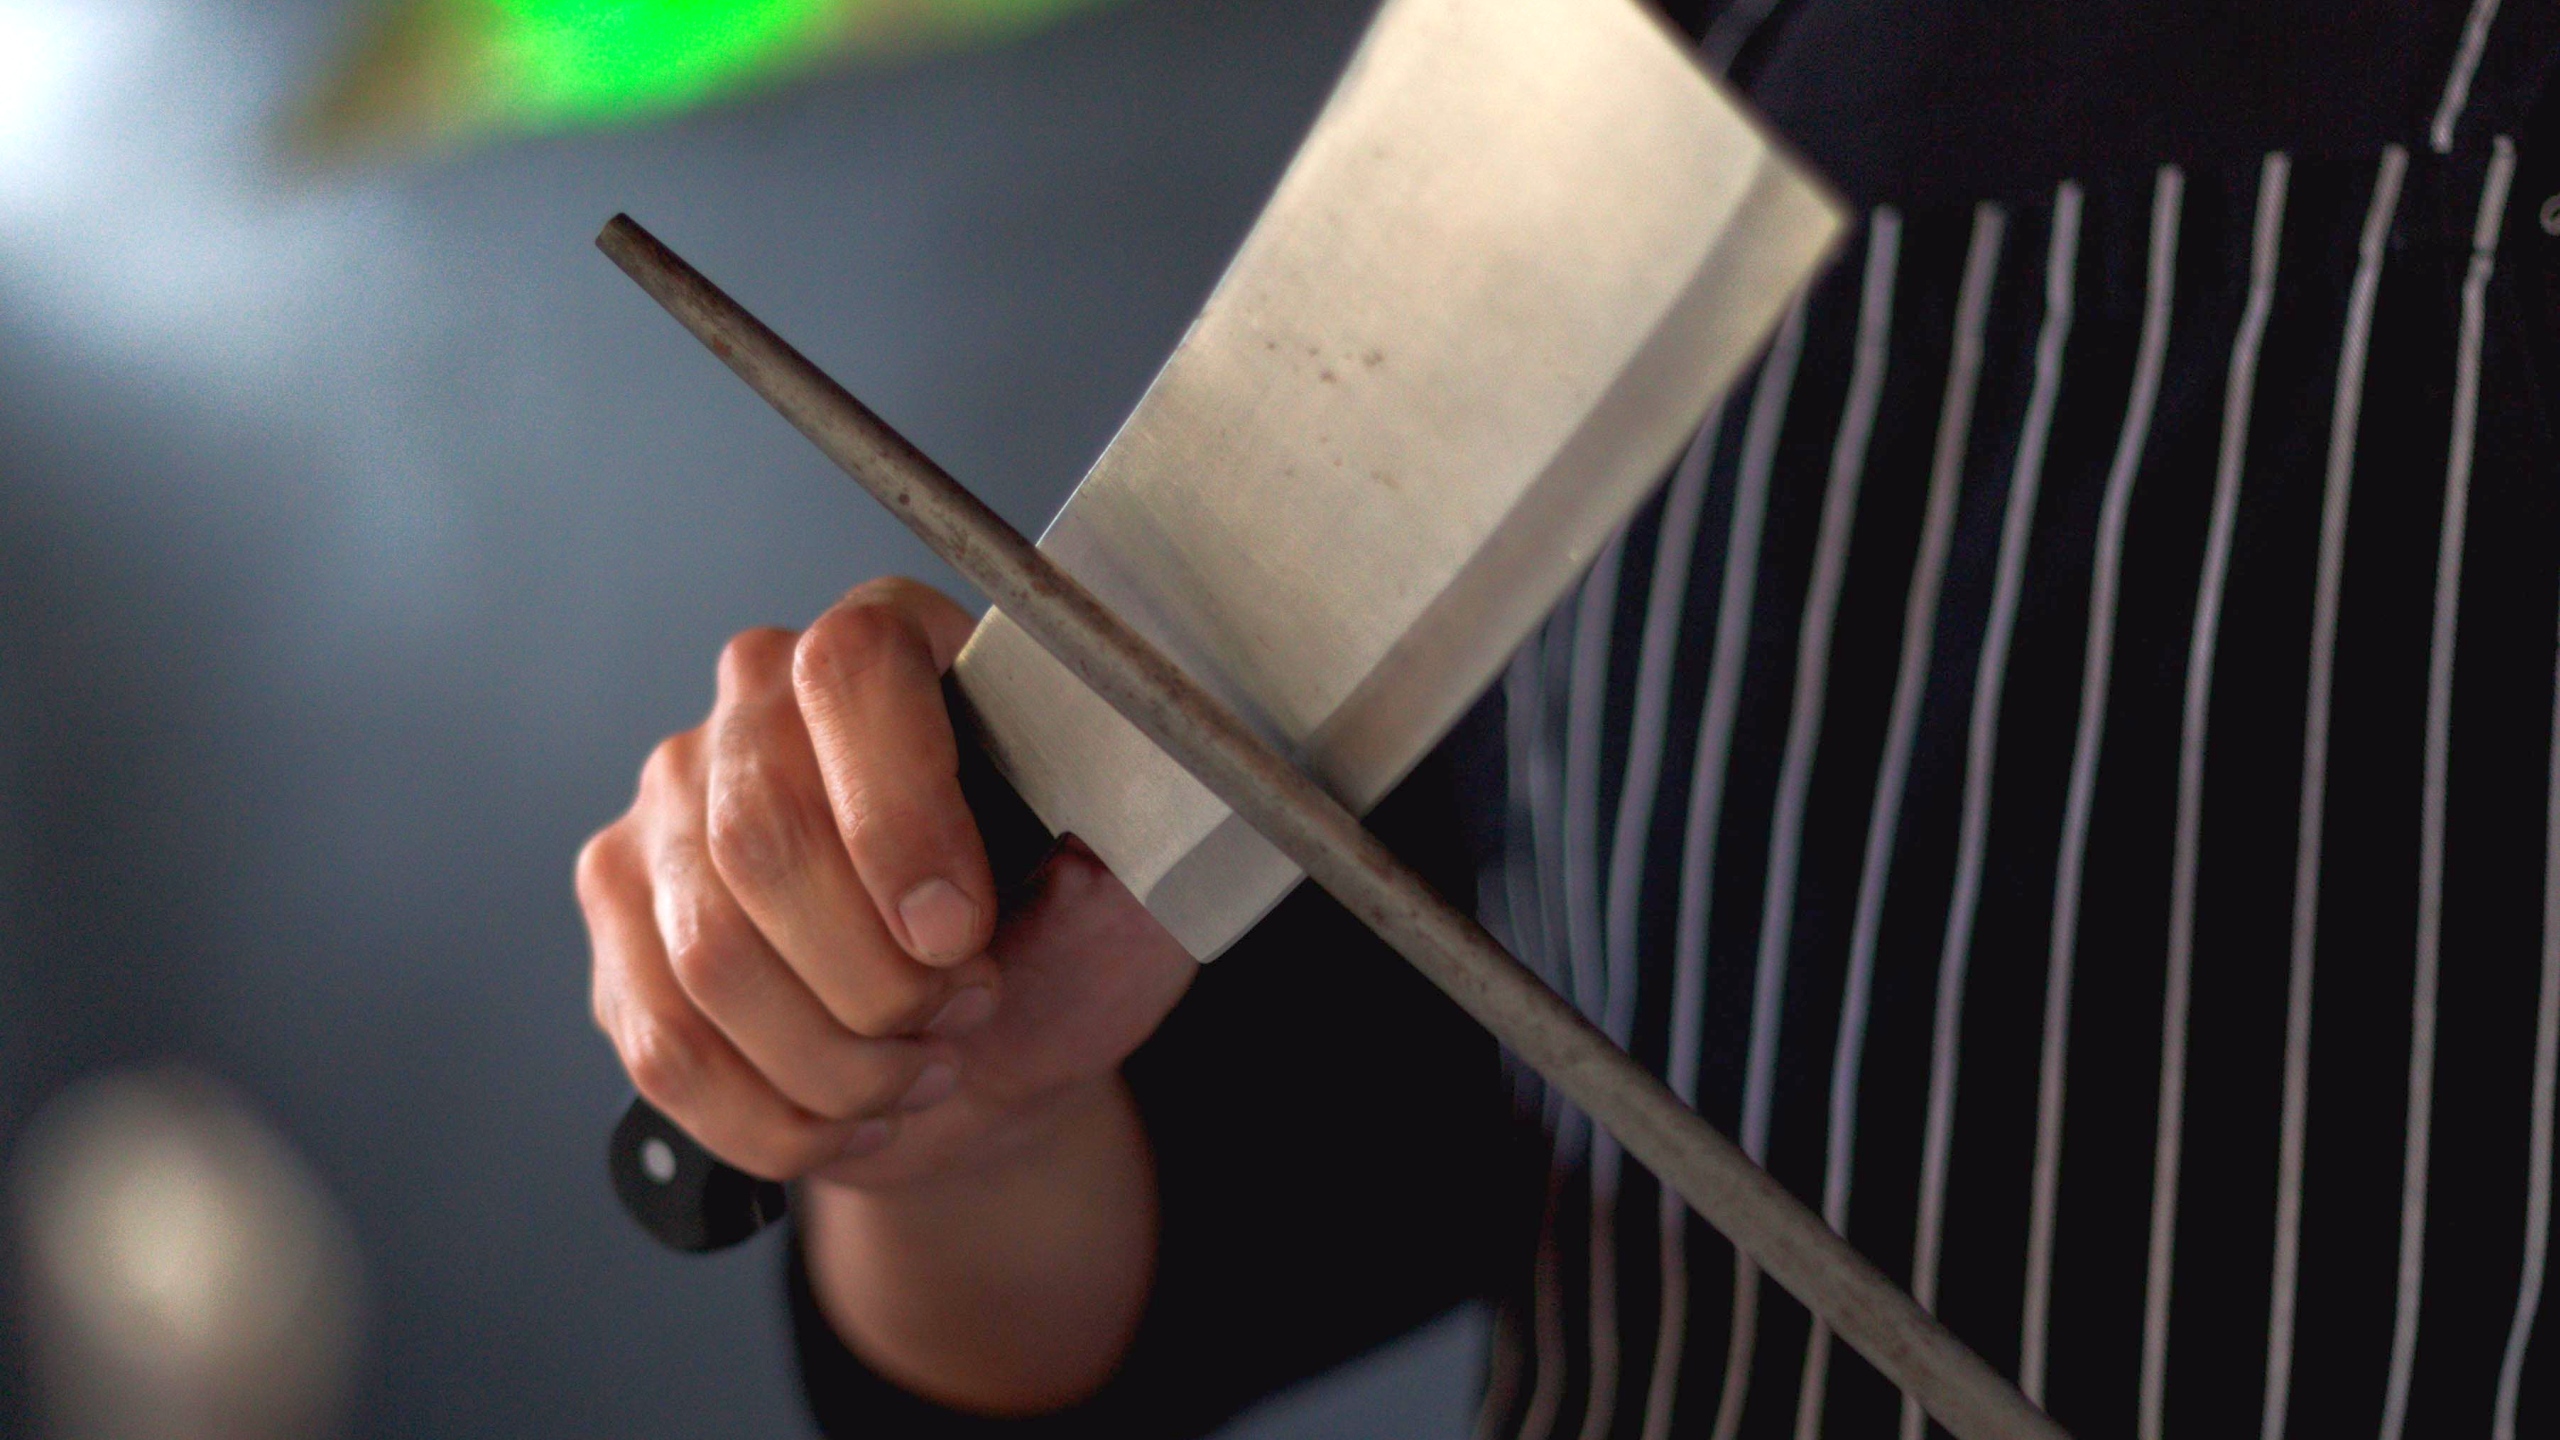 Knife being sharpened